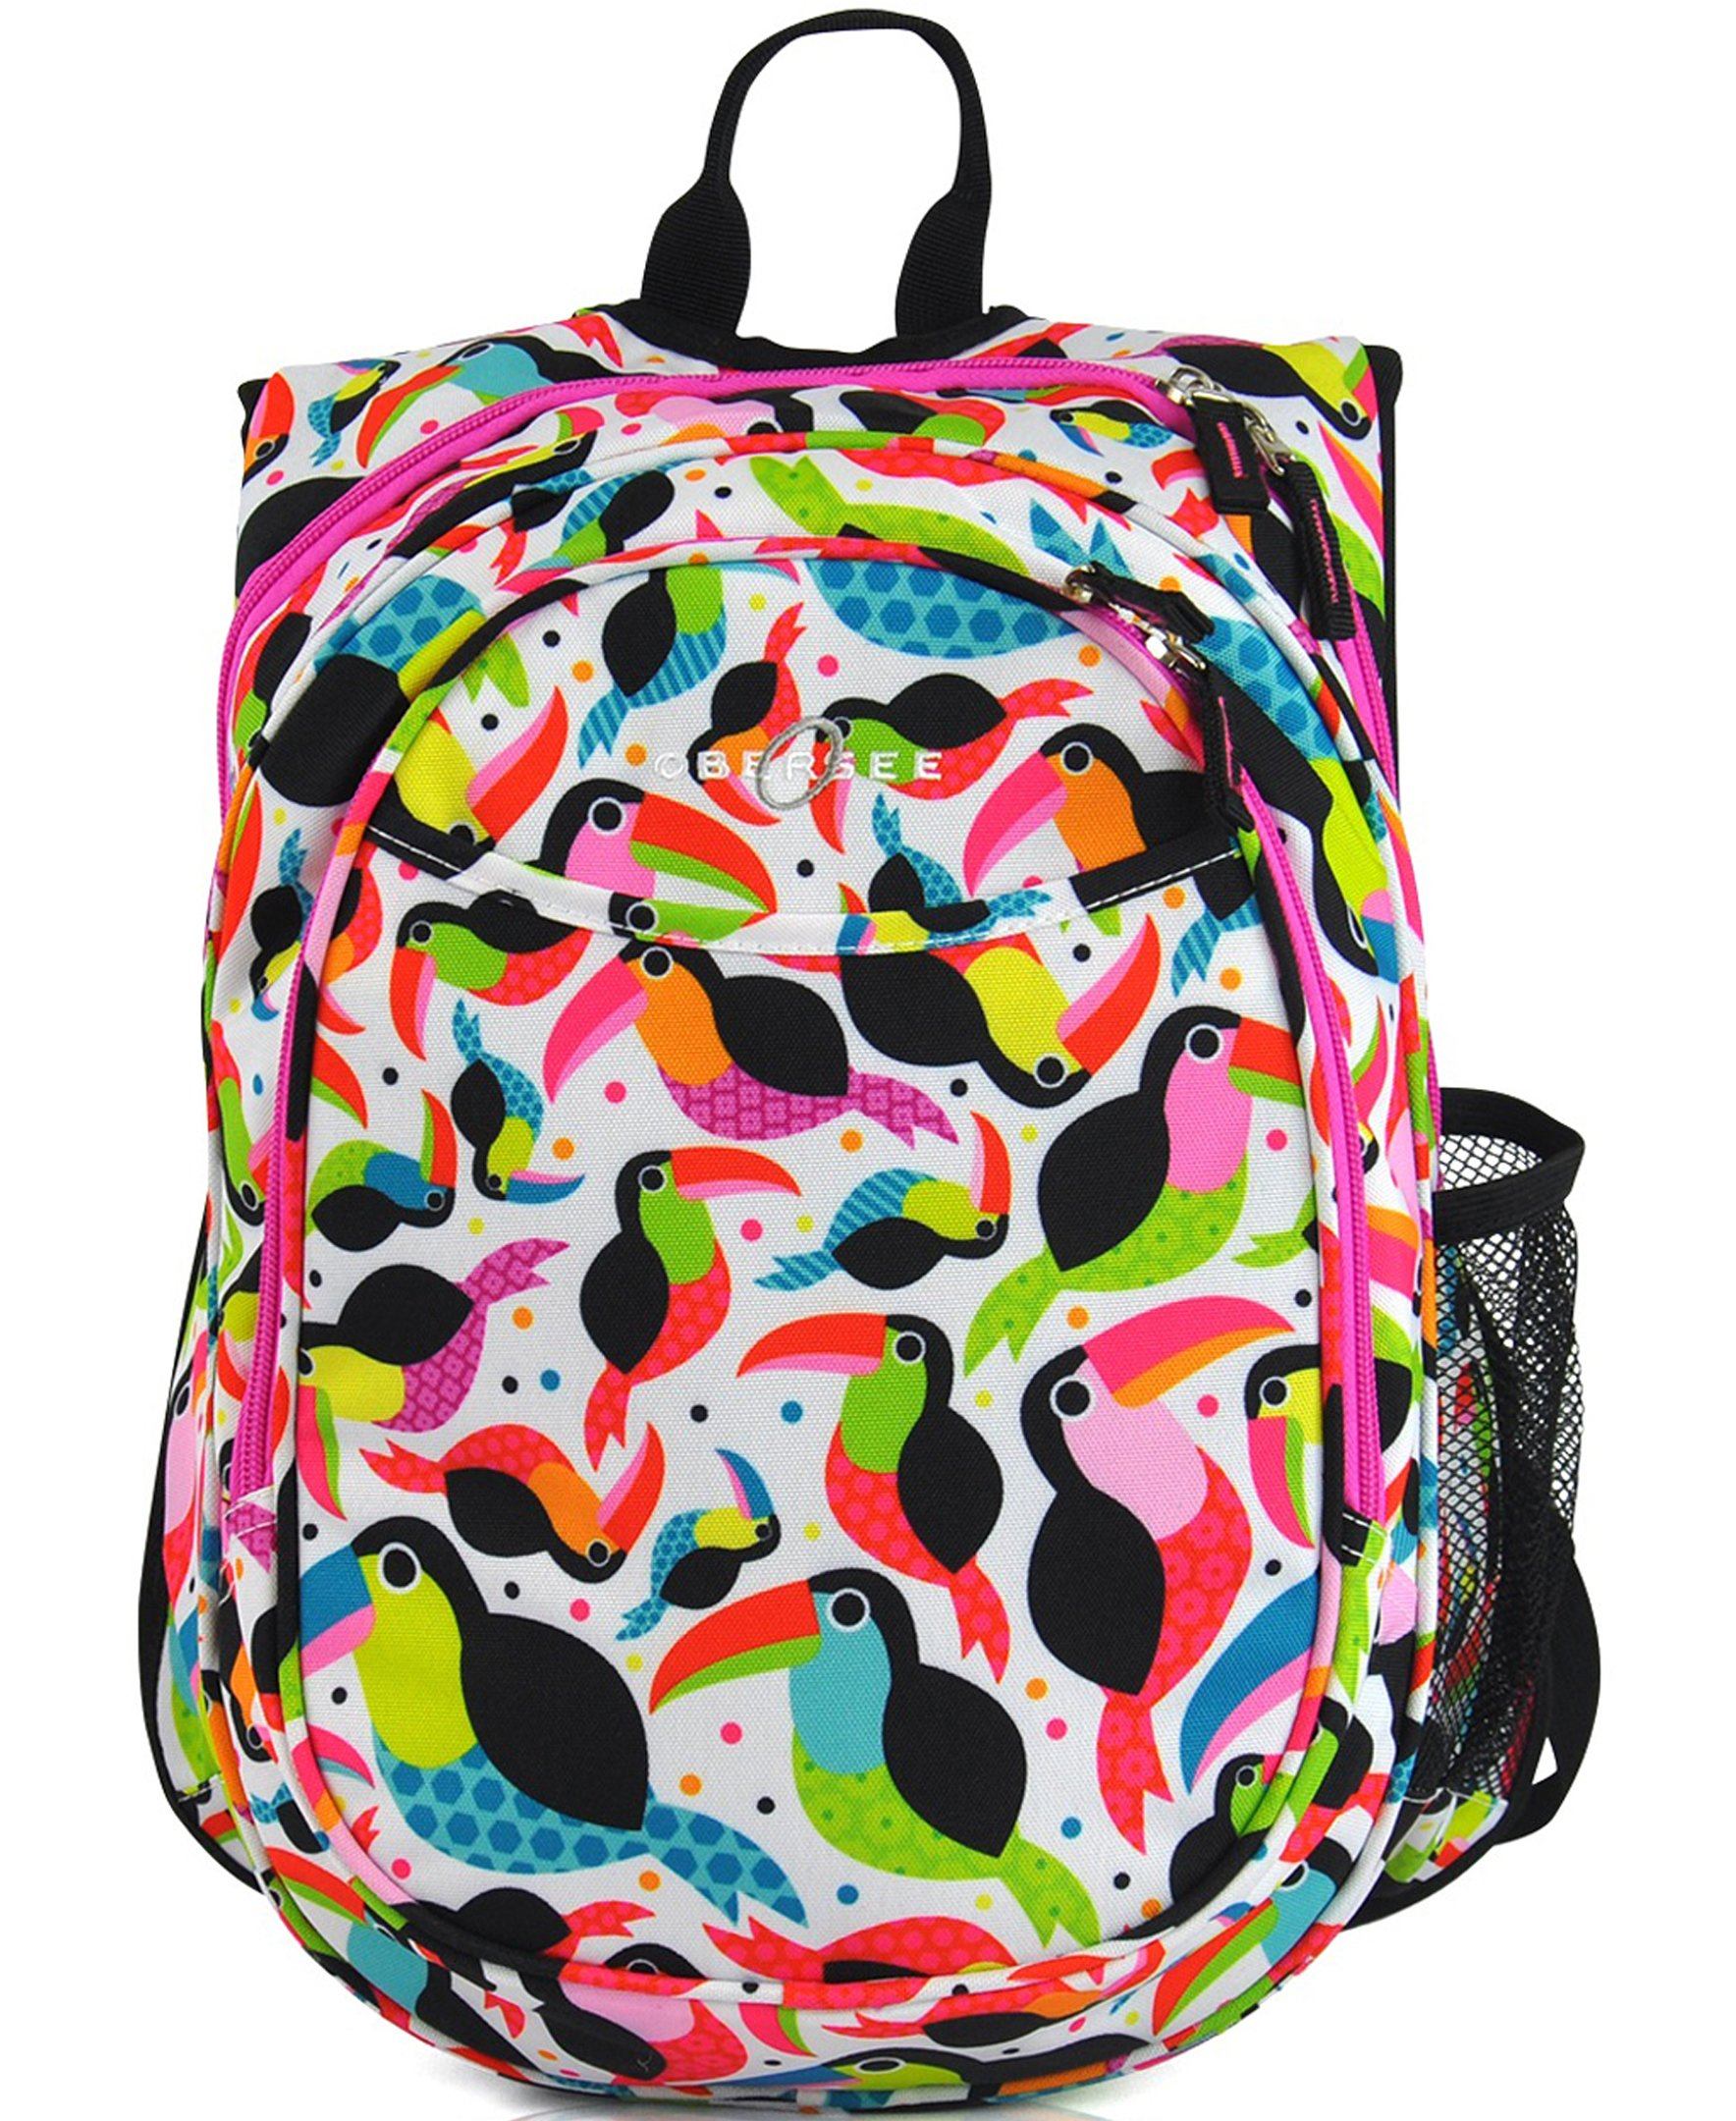 O3KCBP023 Obersee Mini Preschool All-in-One Backpack for Toddlers and Kids with integrated Insulated Cooler | Toucan - image 1 of 4